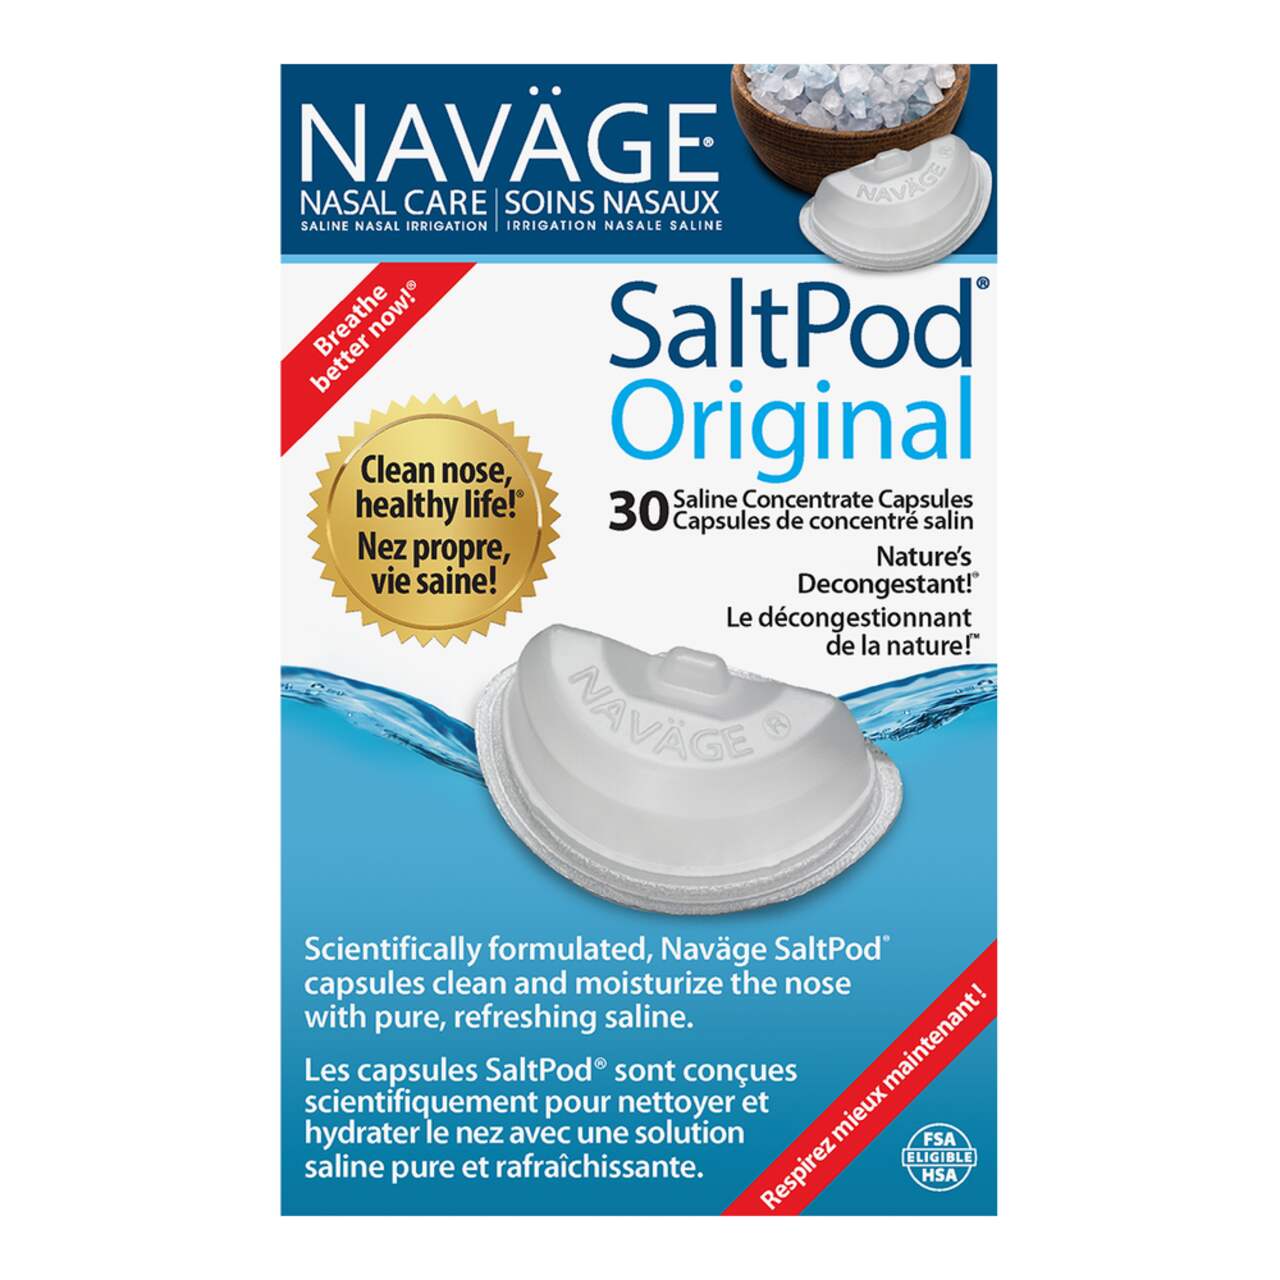 https://media-www.canadiantire.ca/product/living/personal-garment-care/personal-care/0439437/navage-saltpod-original-30-pack-01003397-1db9-48ac-a3fc-ce4eab95e62a.png?imdensity=1&imwidth=640&impolicy=mZoom